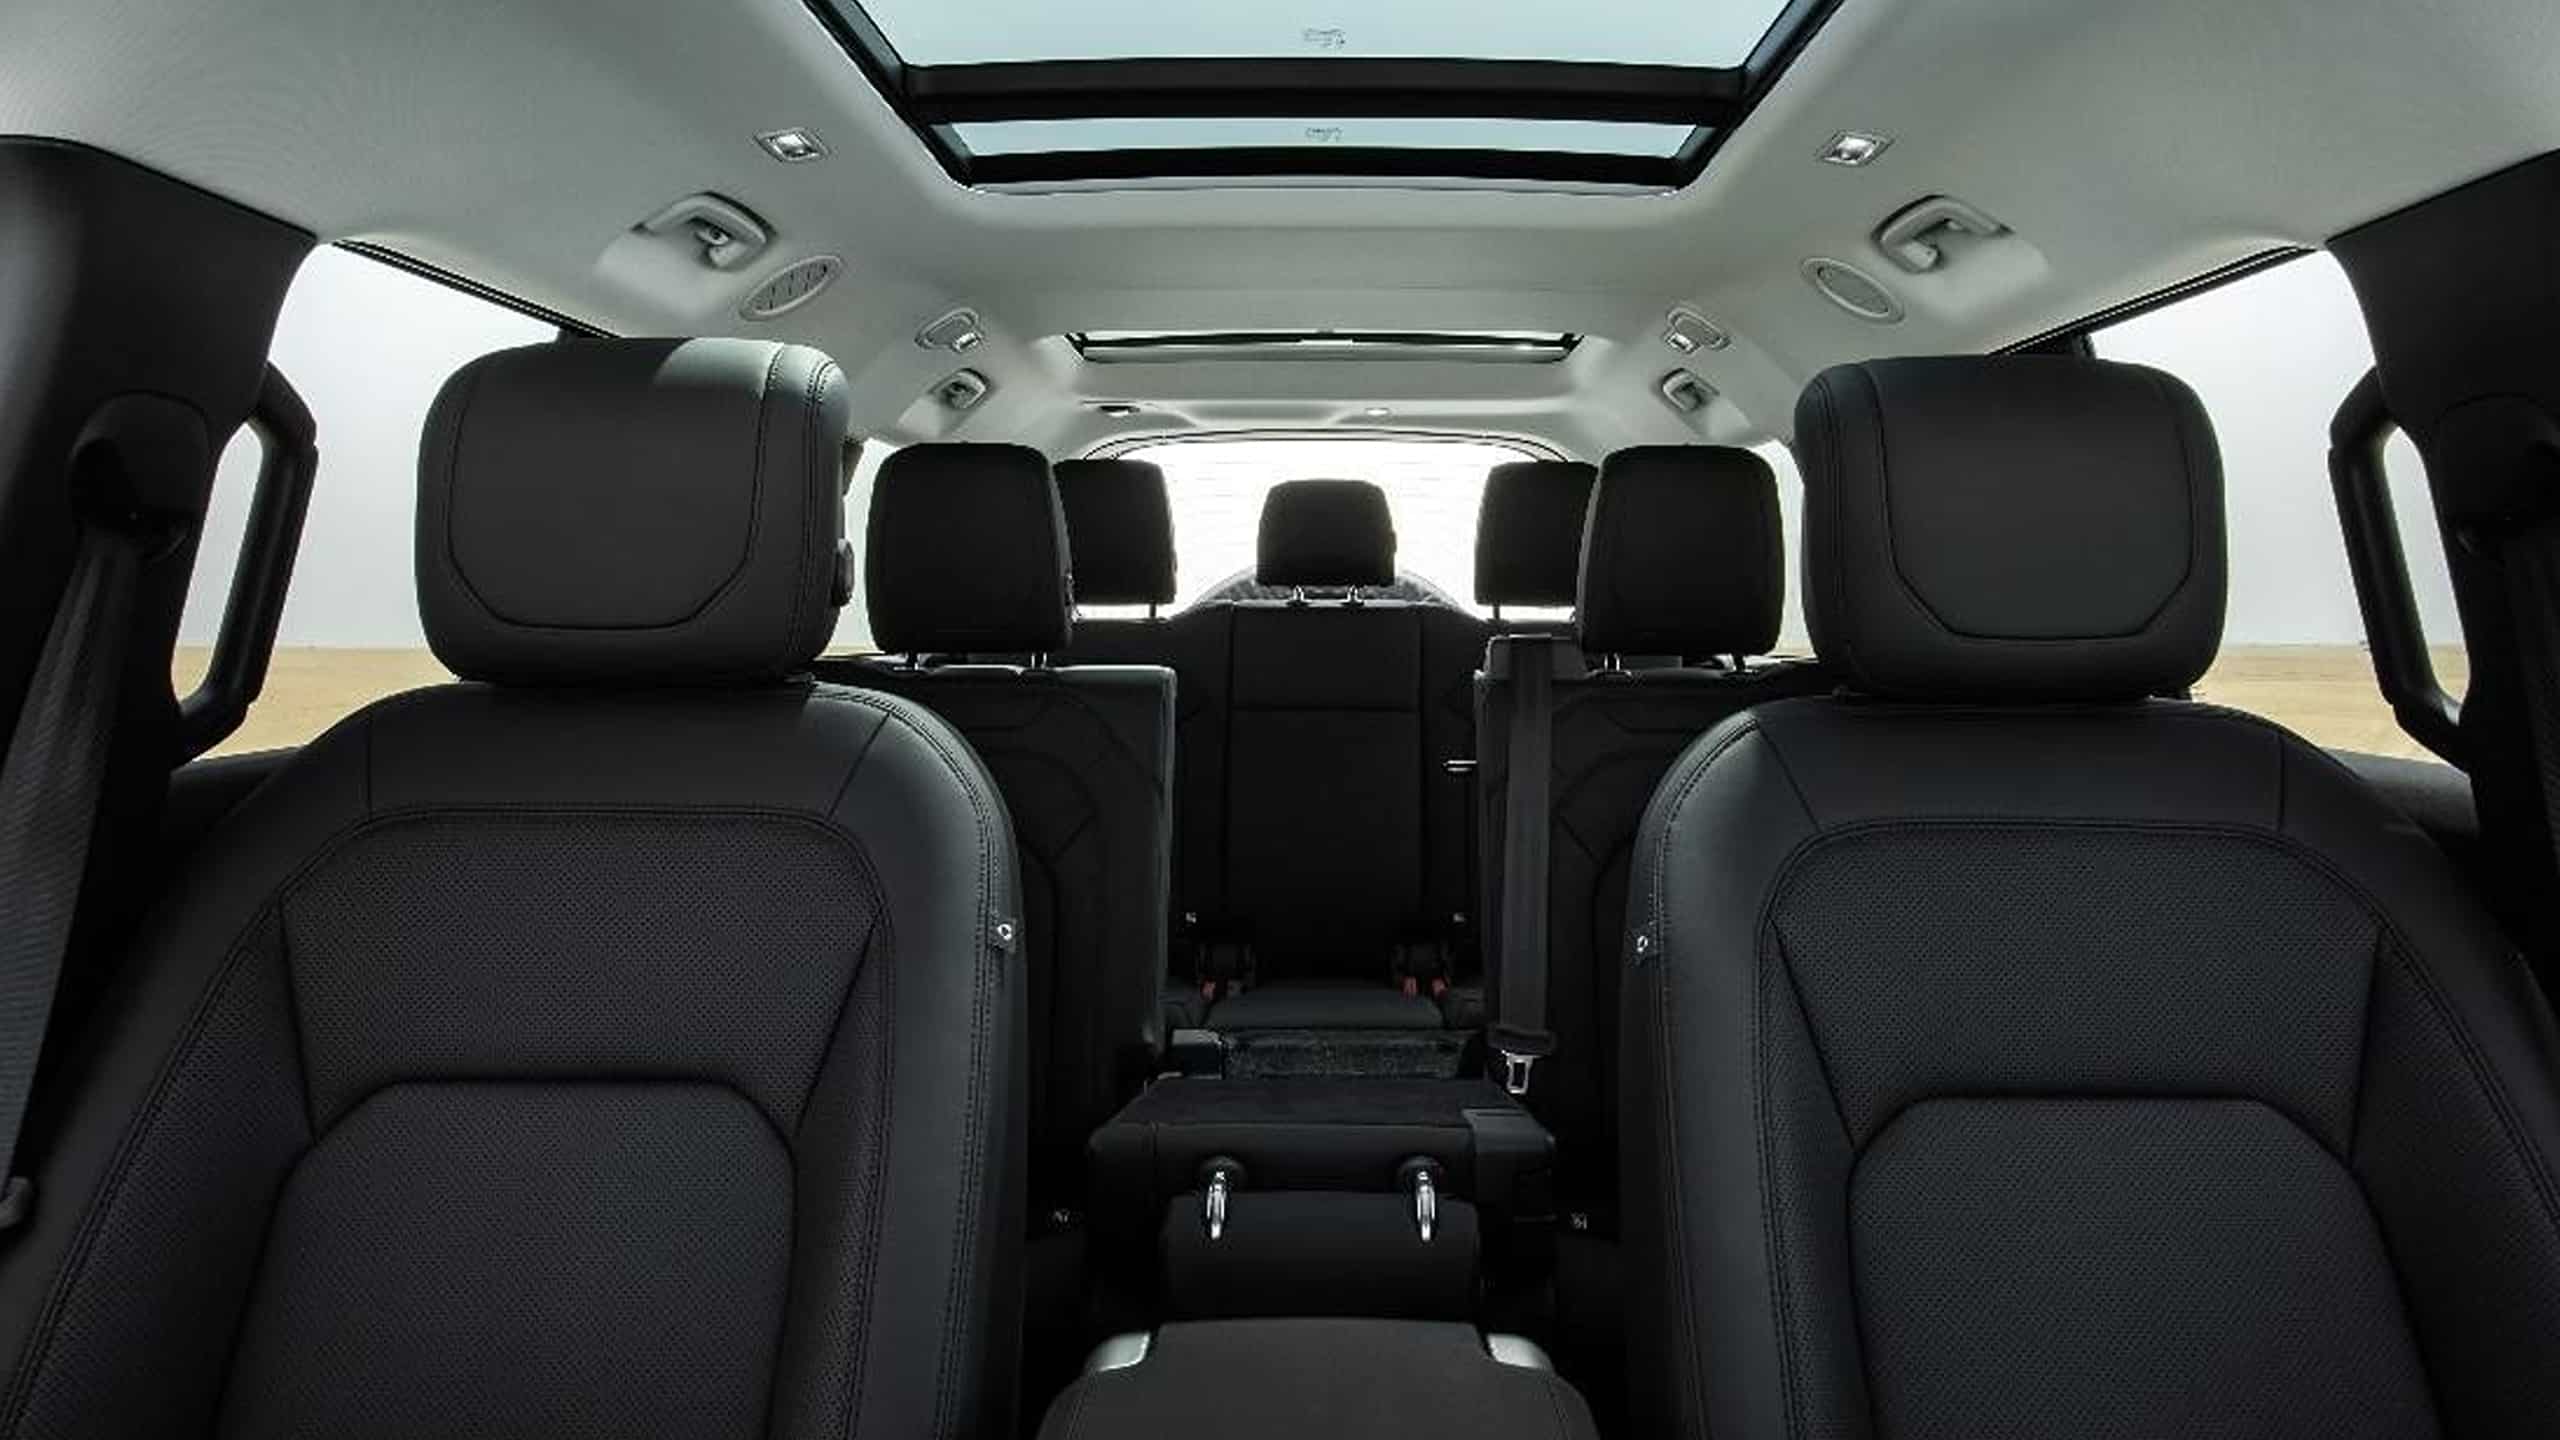 The Land Rover Defender 130 has eight seats (2+3+3) of extra space